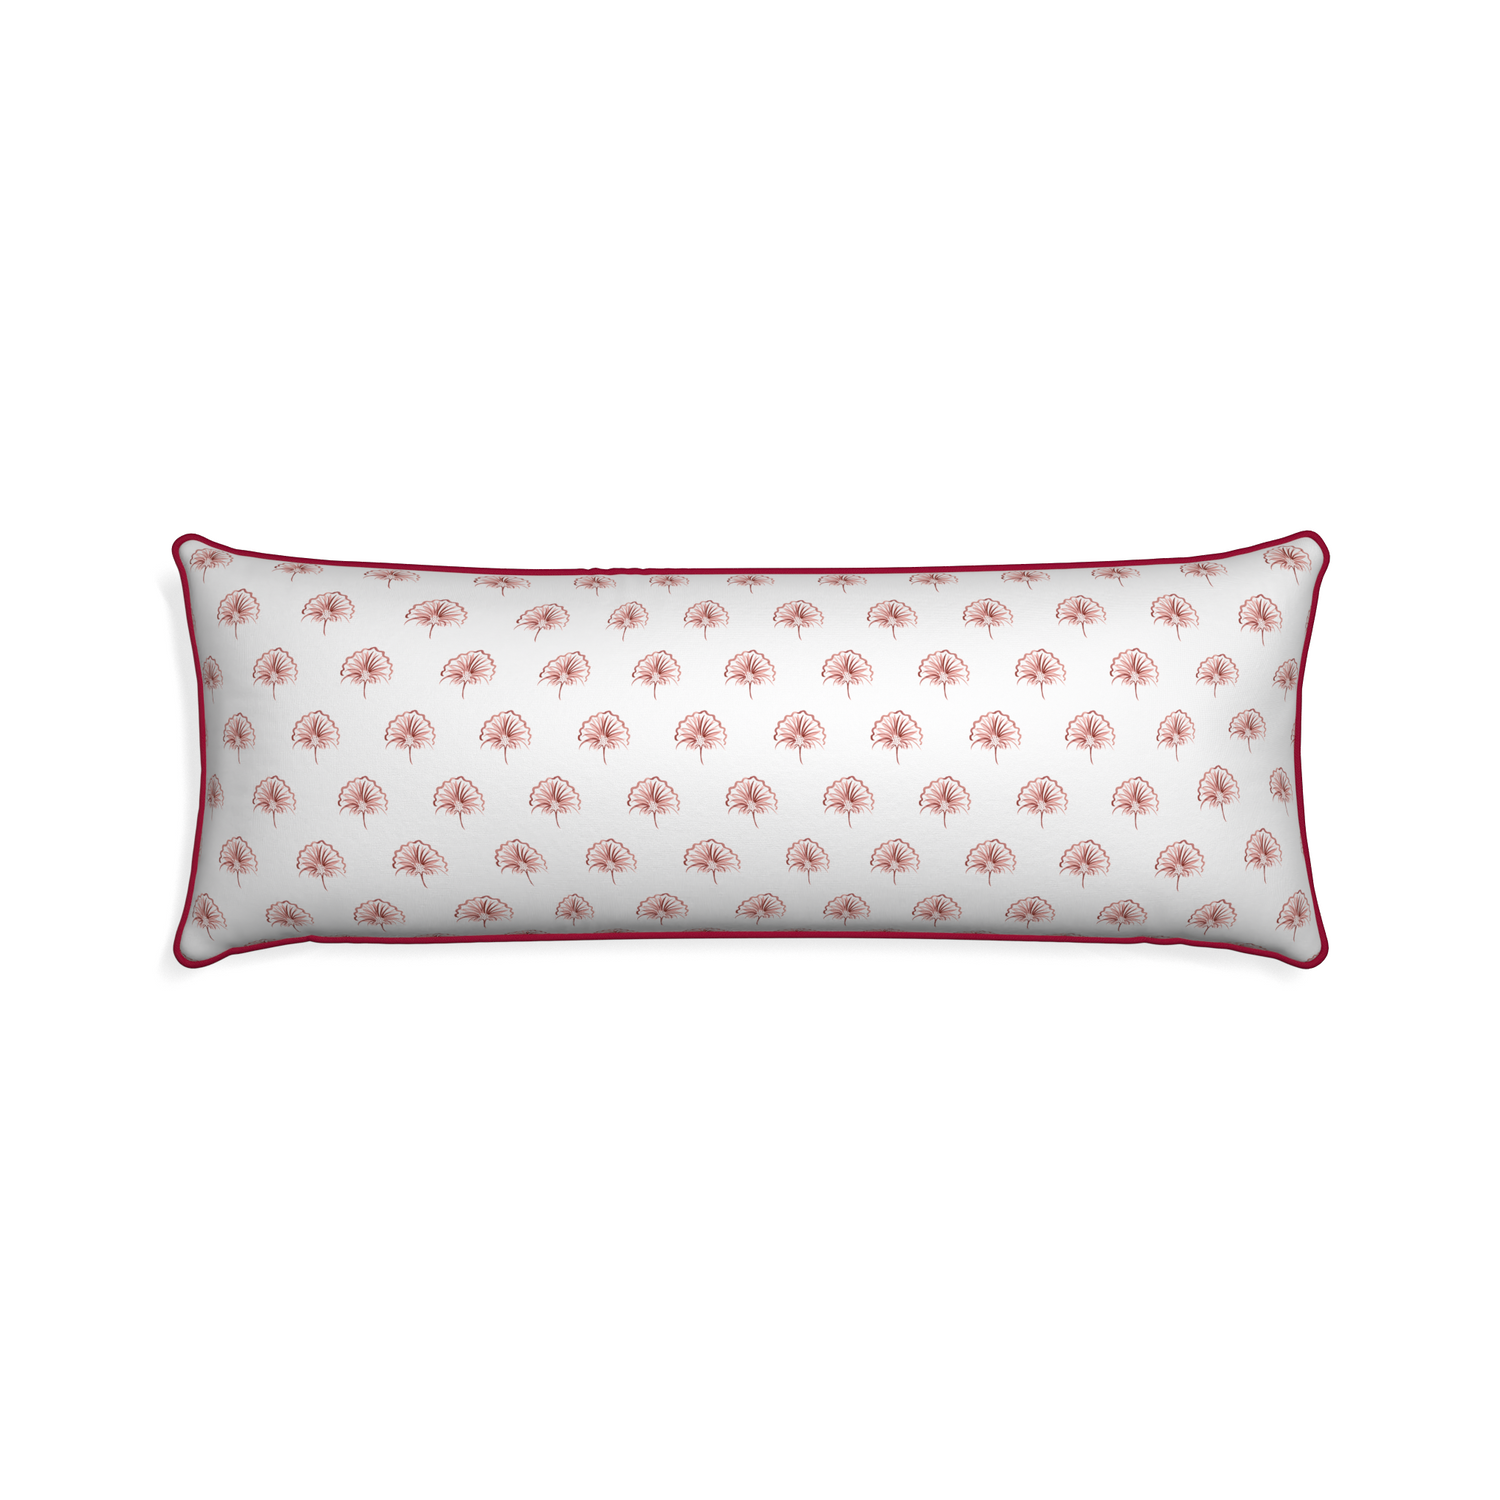 Xl-lumbar penelope rose custom pillow with raspberry piping on white background